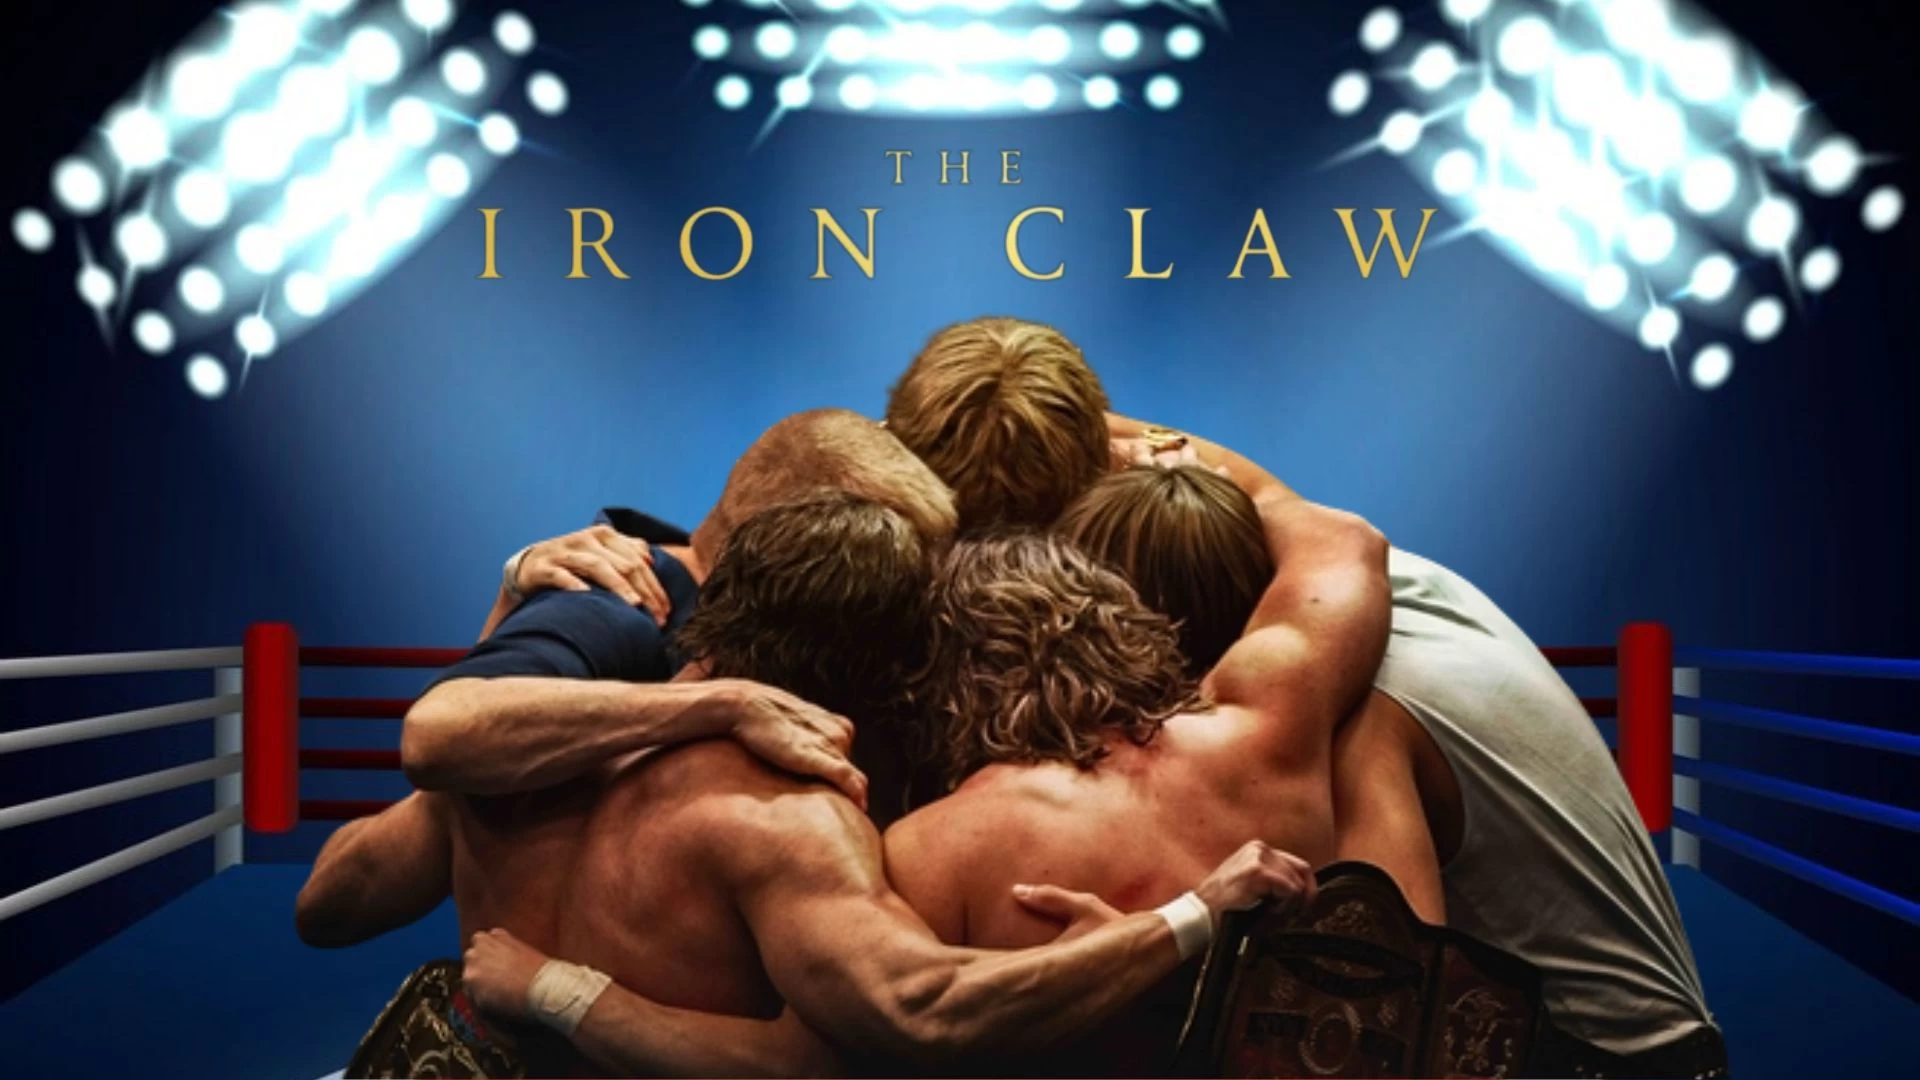 Is The Iron Claw Based on a True Story? The Iron Claw Release Date, Cast and More